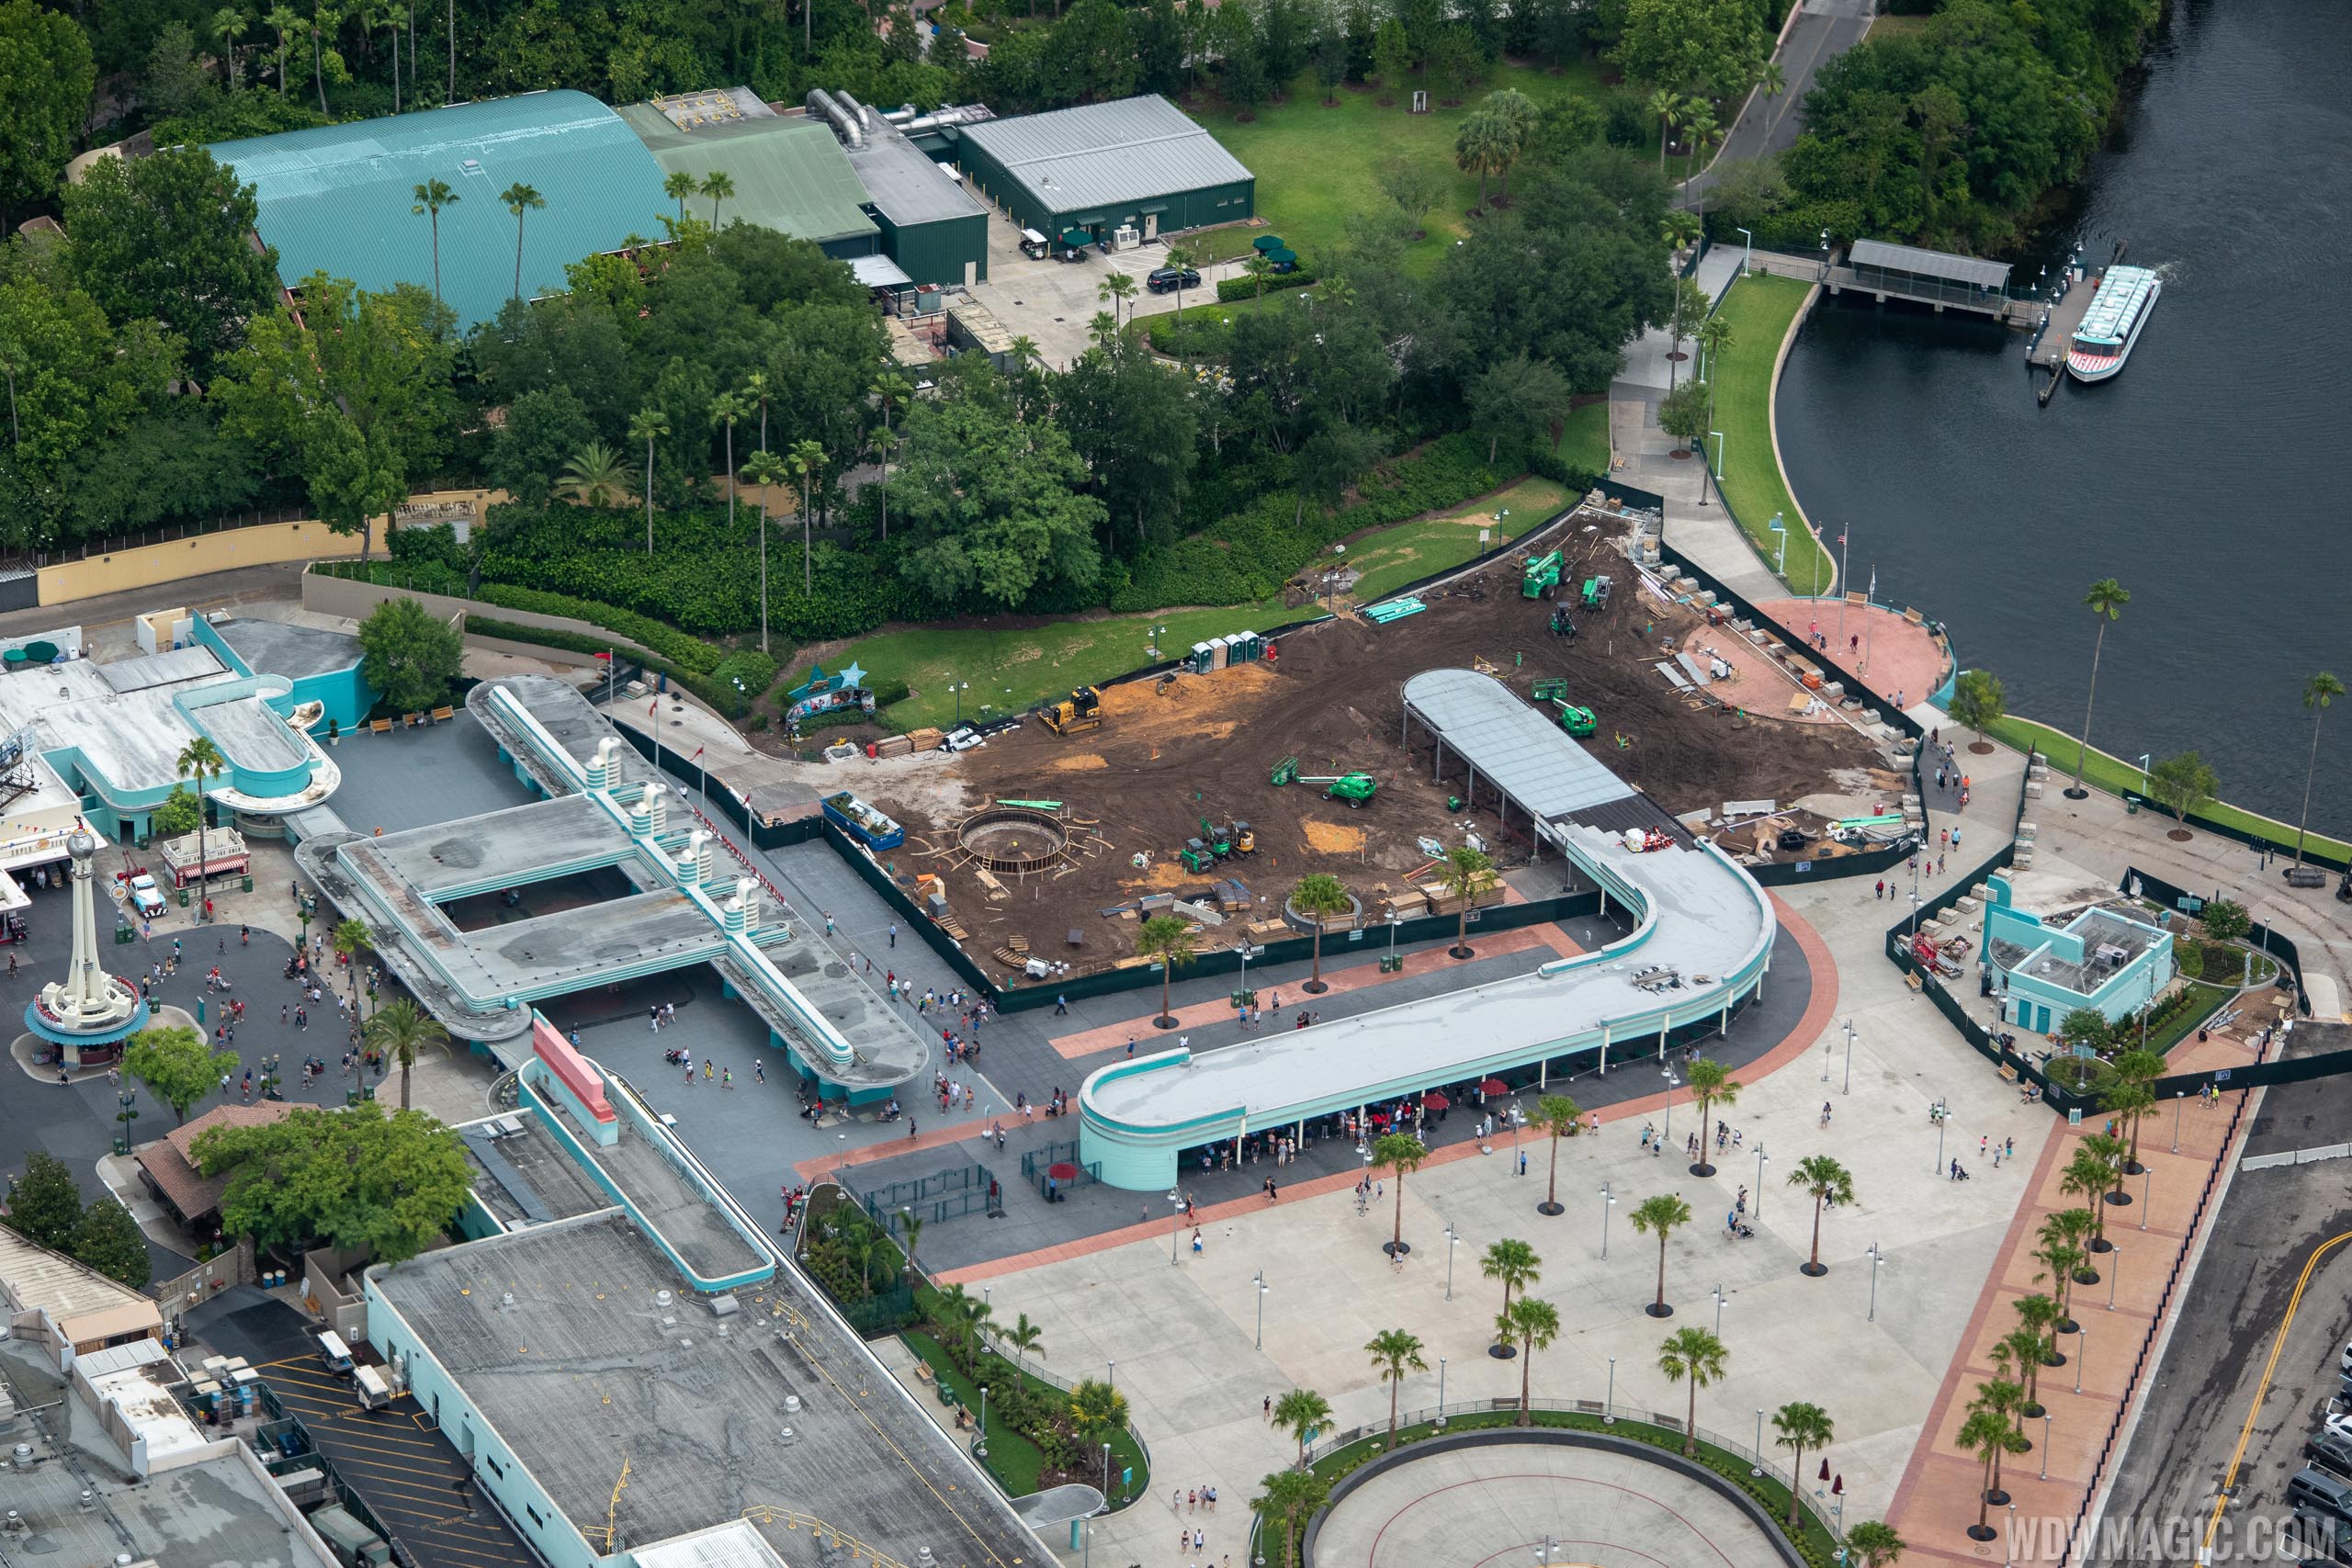 PHOTOS - Aerial view of the new Disney's Hollywood Studios entrance